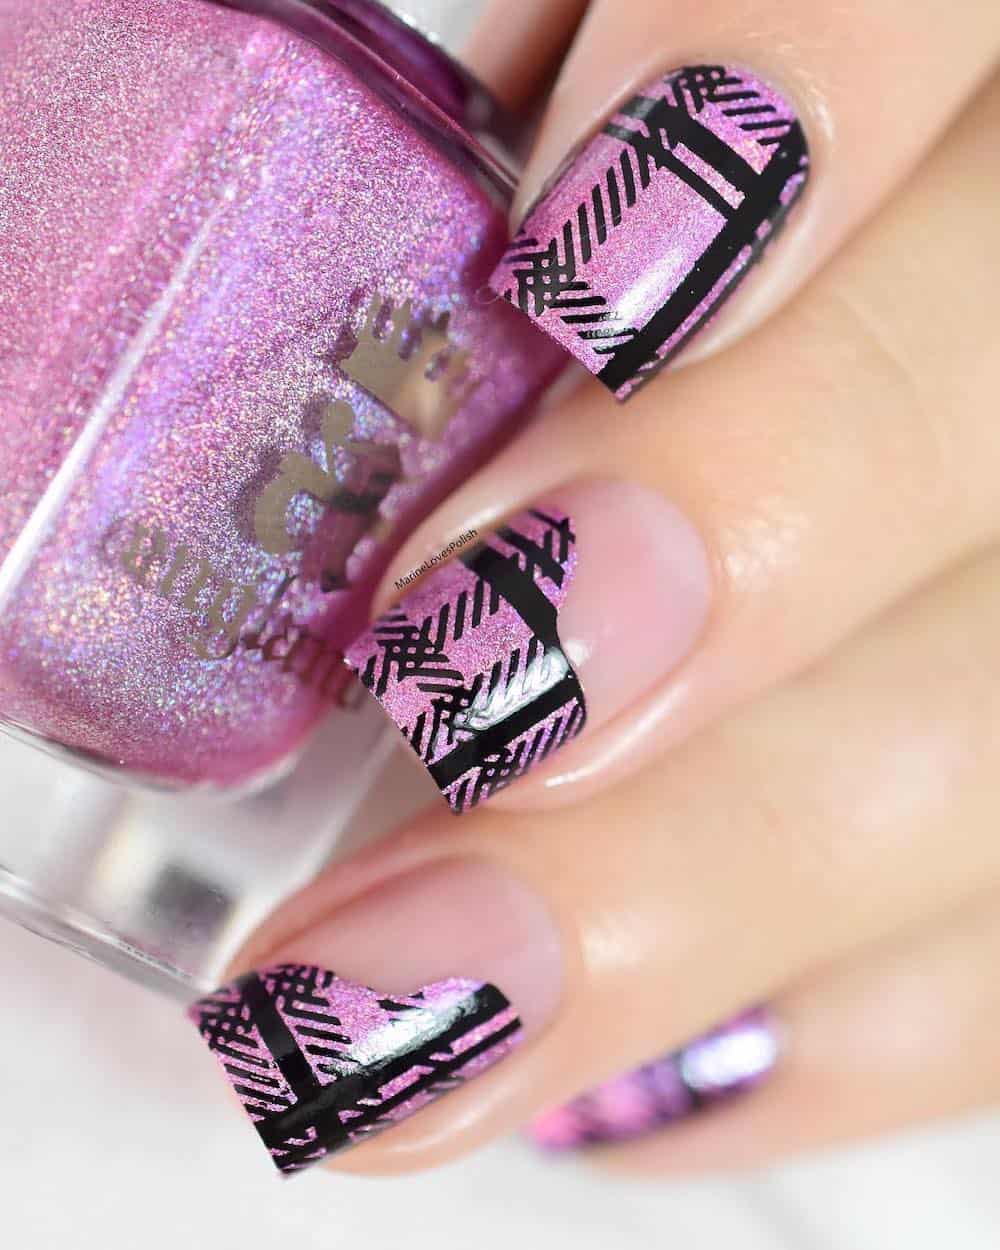 A hand with short square nails painted with pink glitter and black plaid nail art